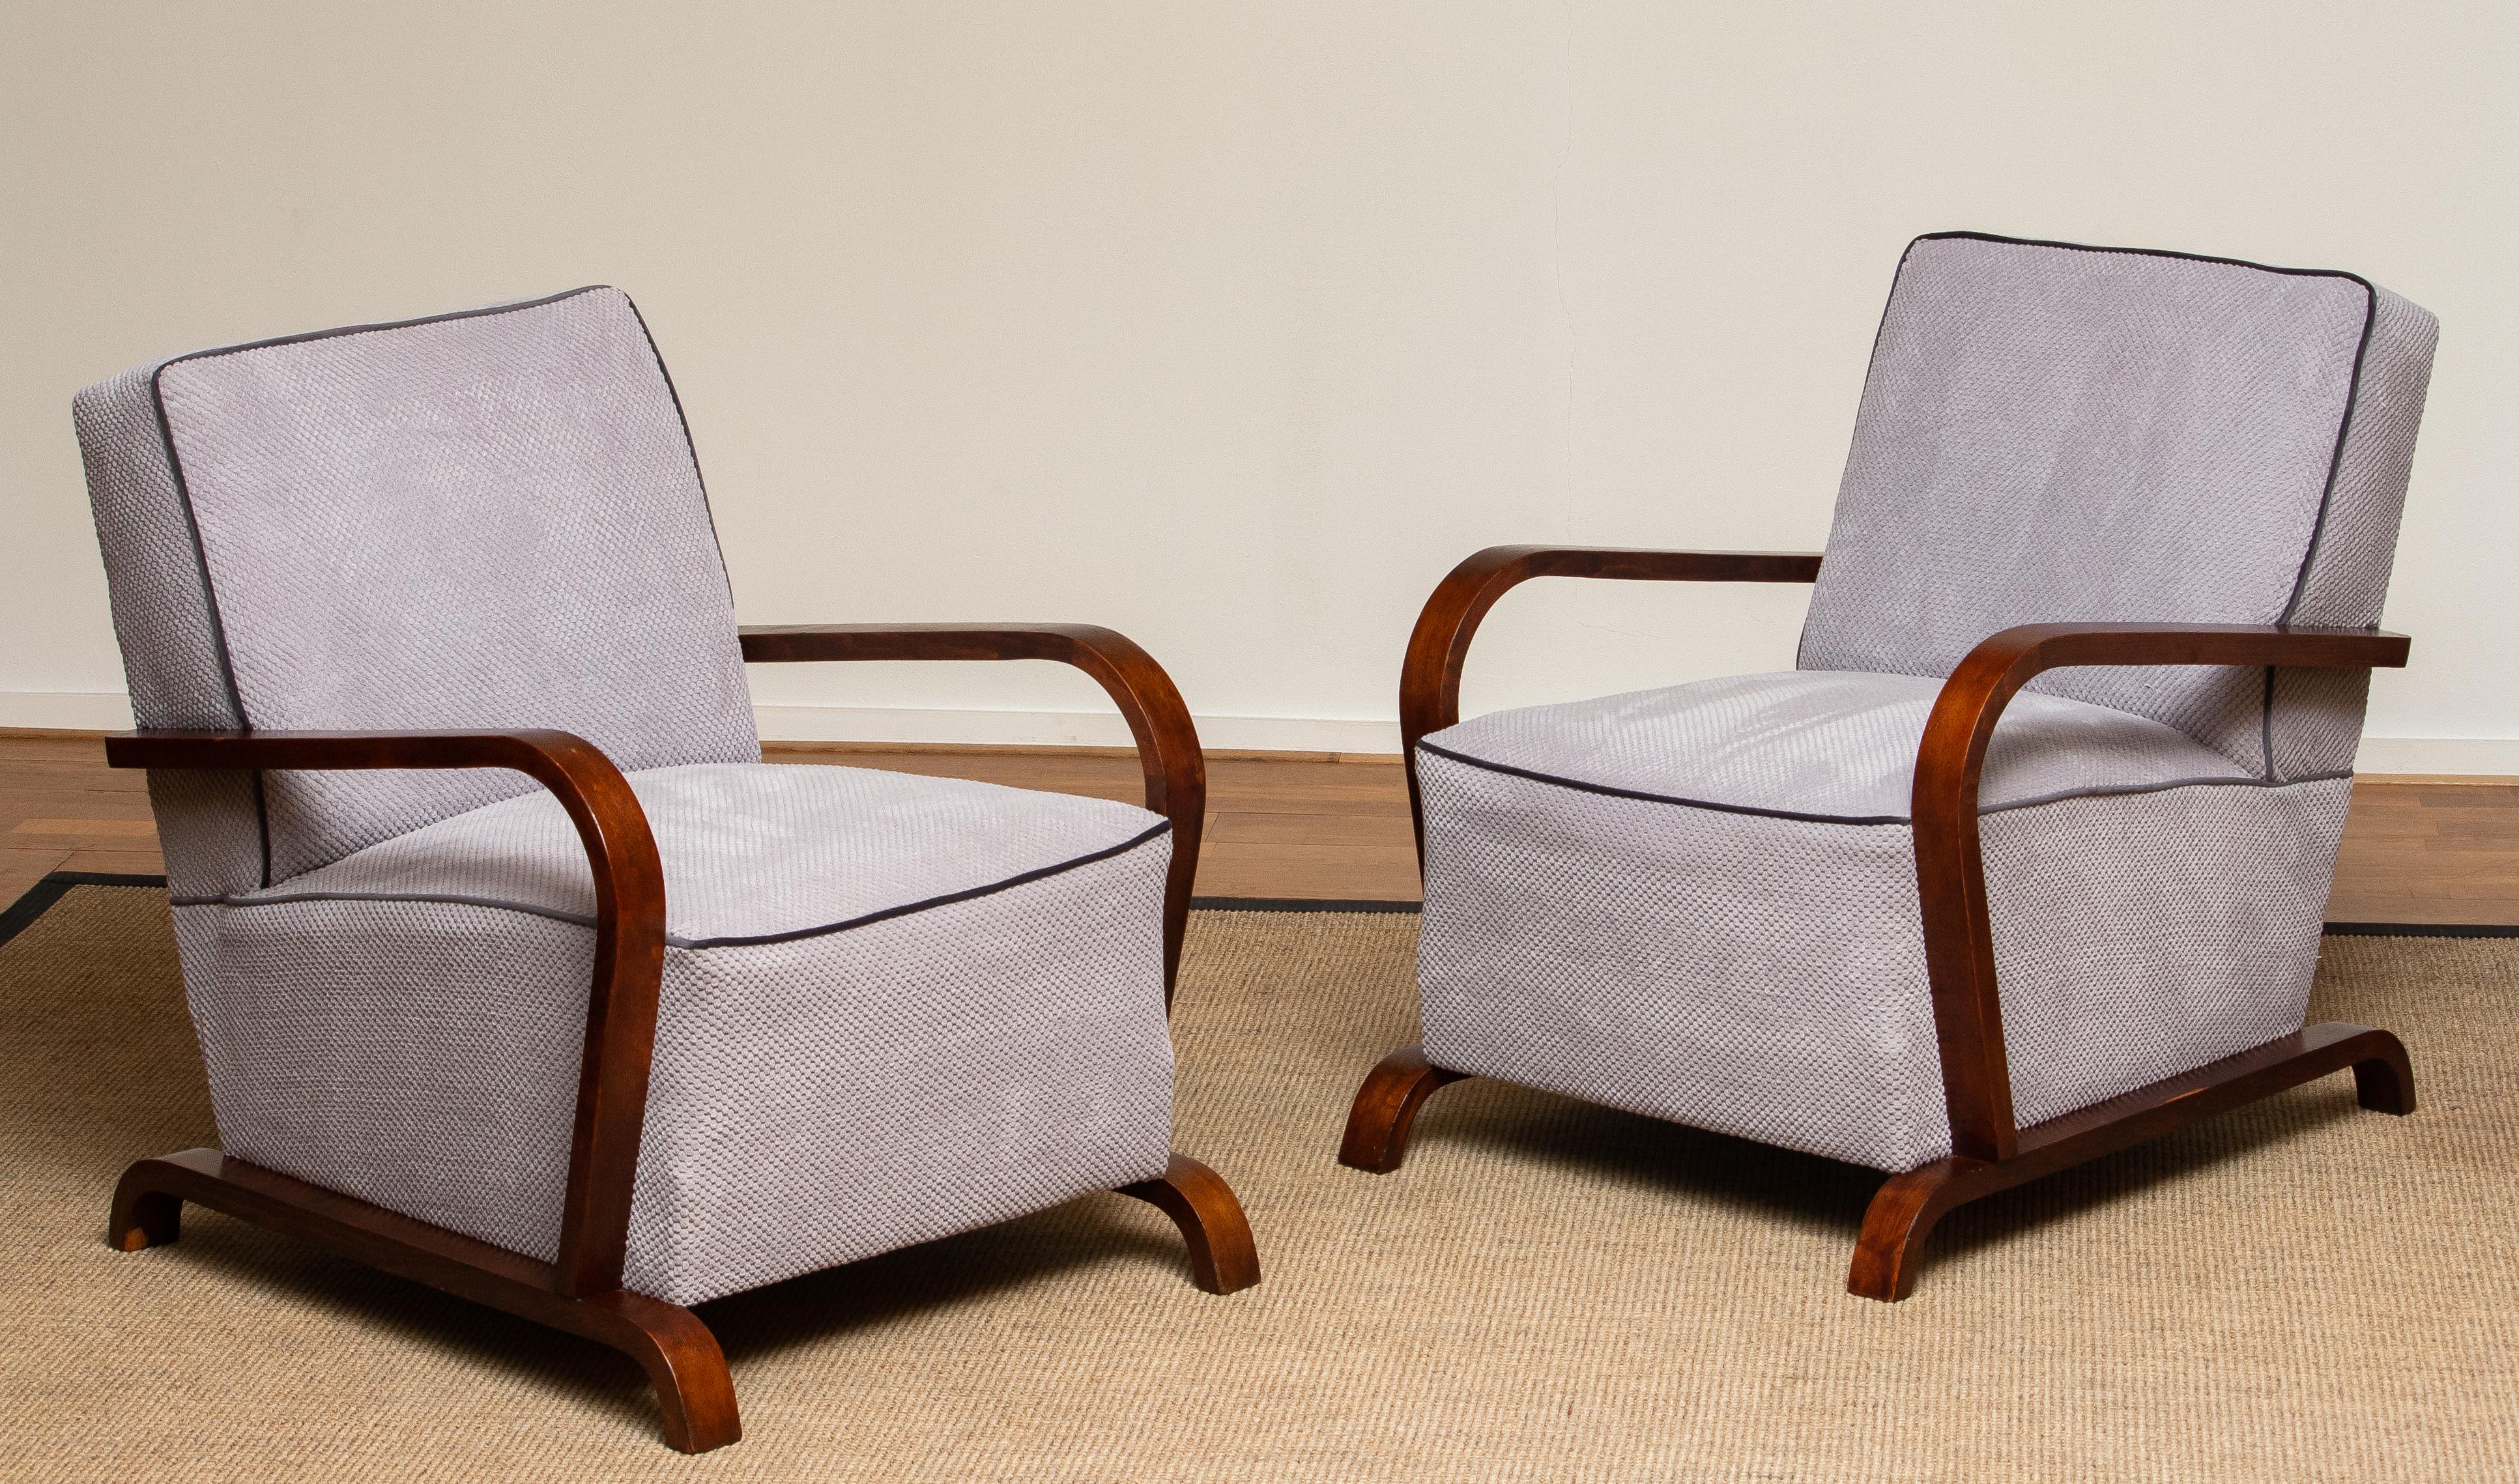 Early 20th Century 1920s, Pair of Scandinavian Art Deco Armchair / Lounge / Club Chairs from Sweden